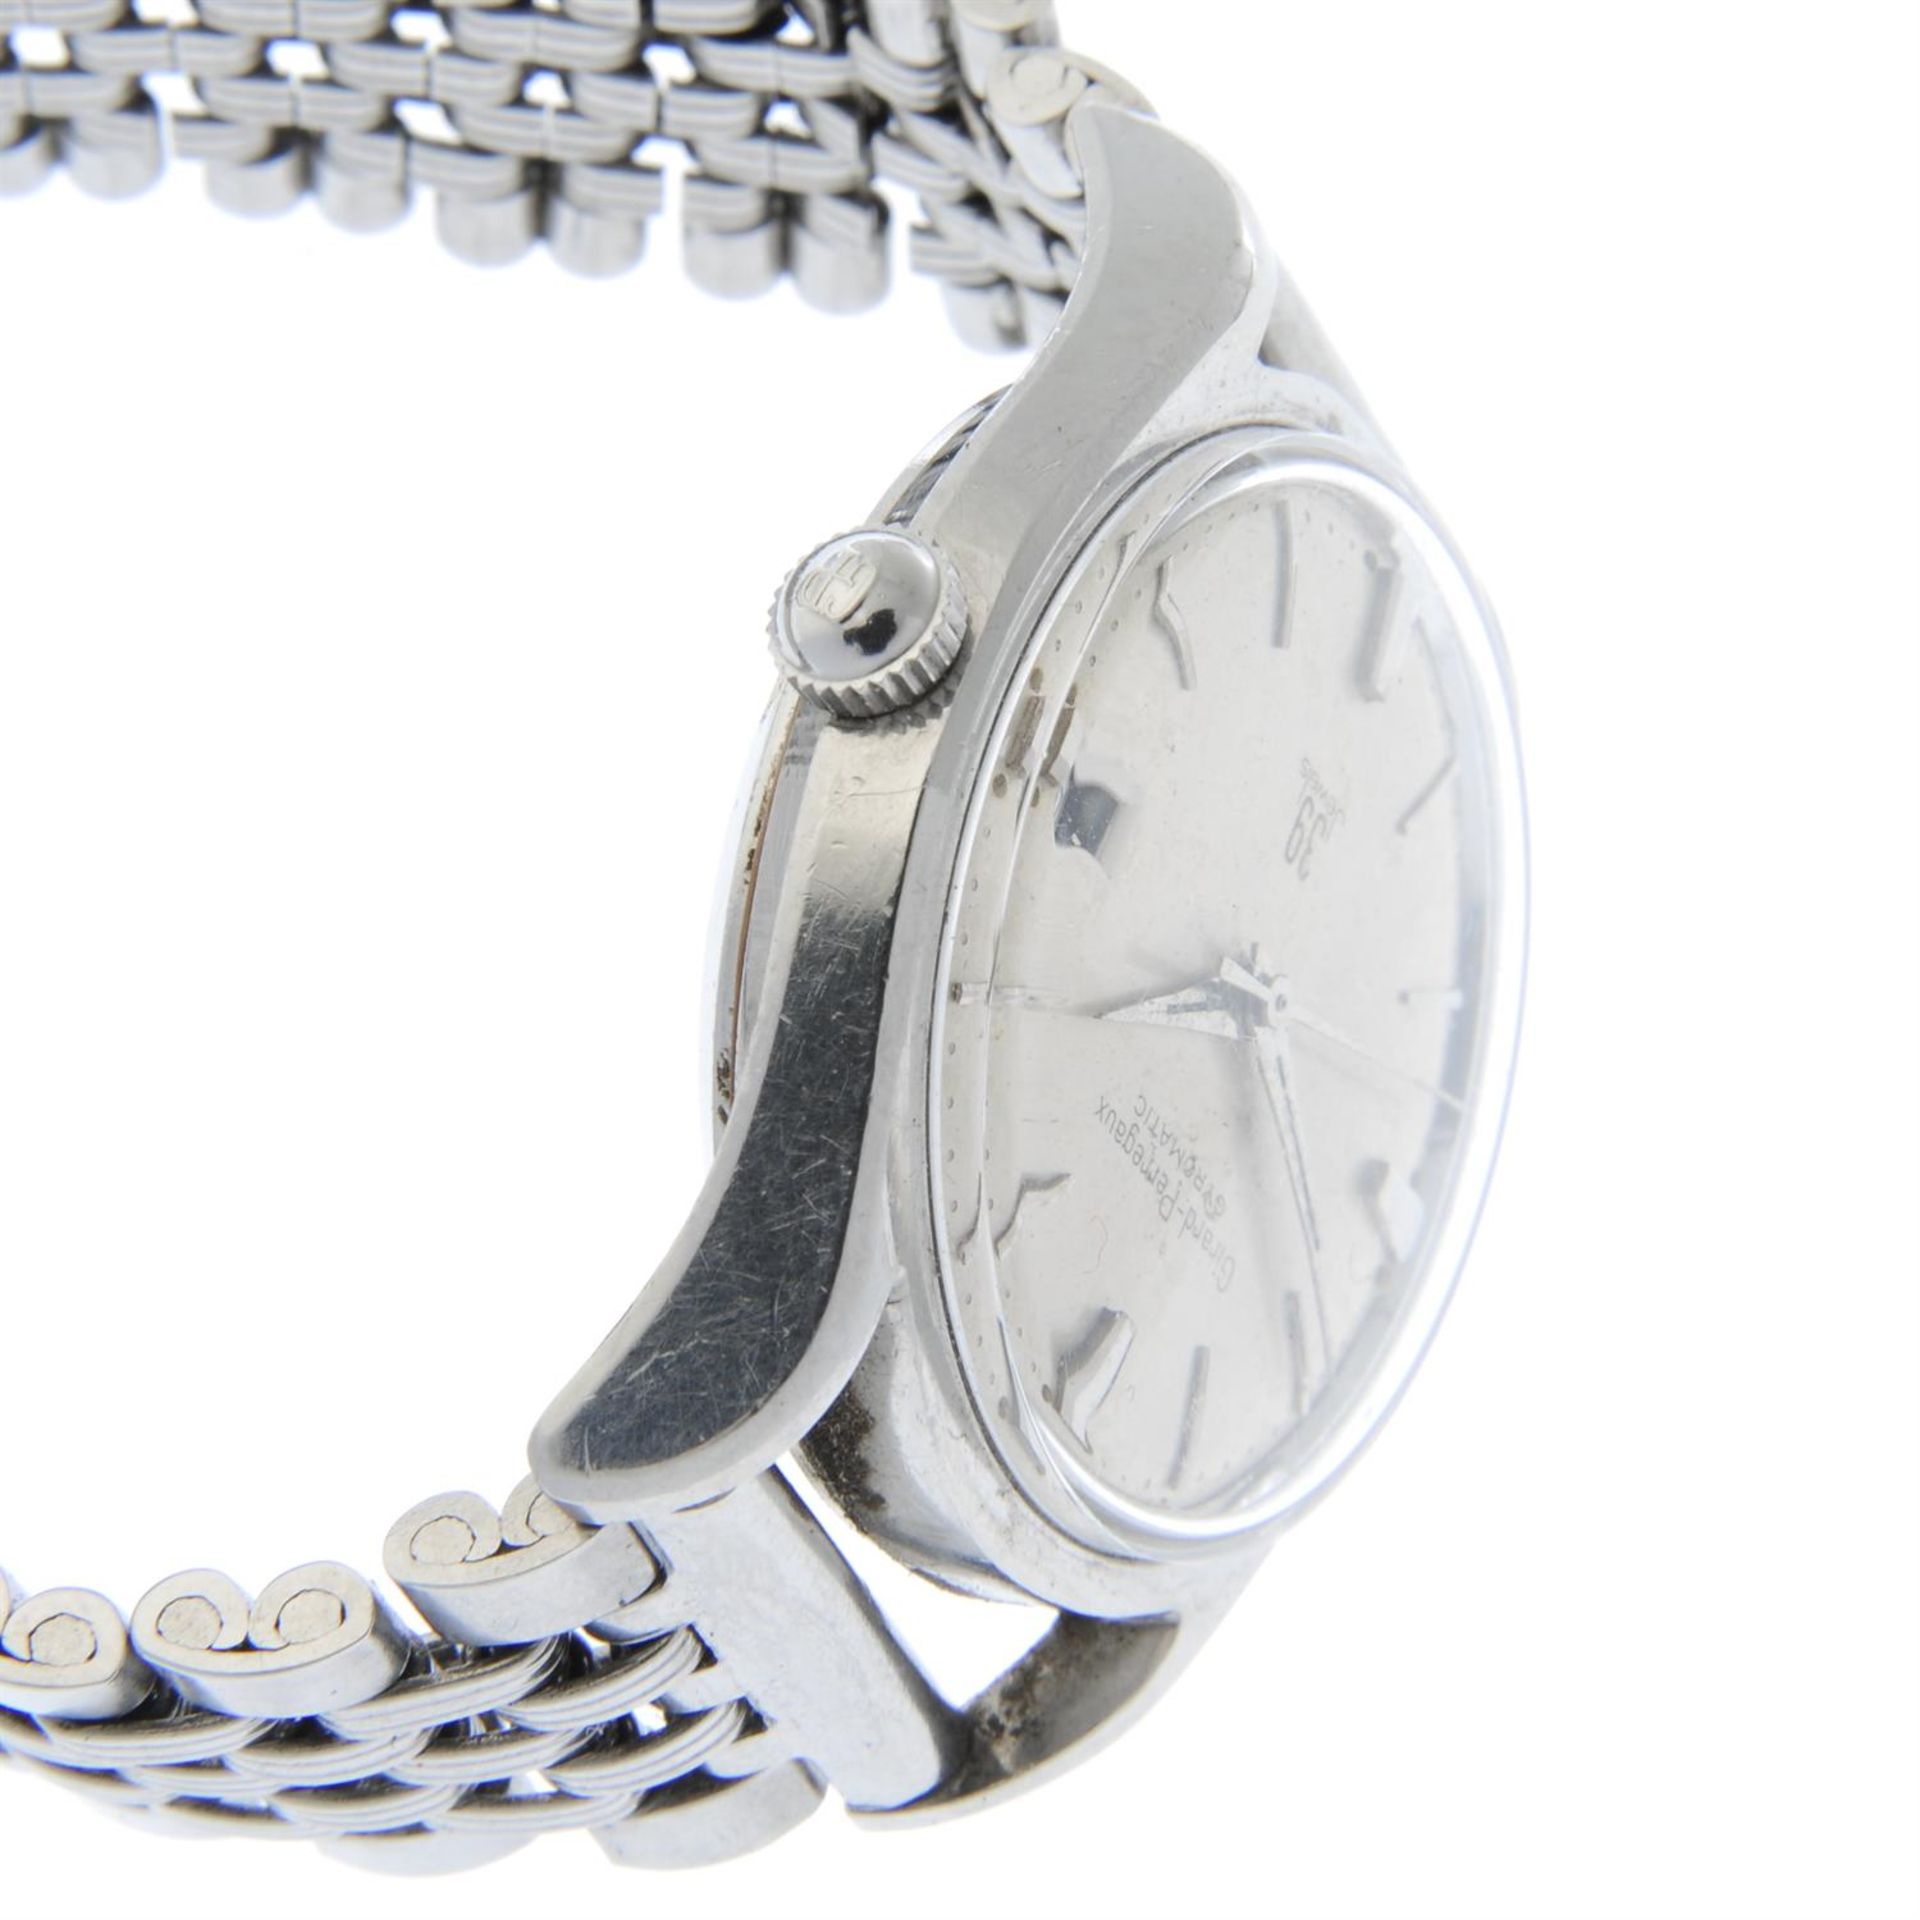 GIRARD PERREGAUX - a stainless steel Gyromatic bracelet watch, 33mm. - Image 3 of 4